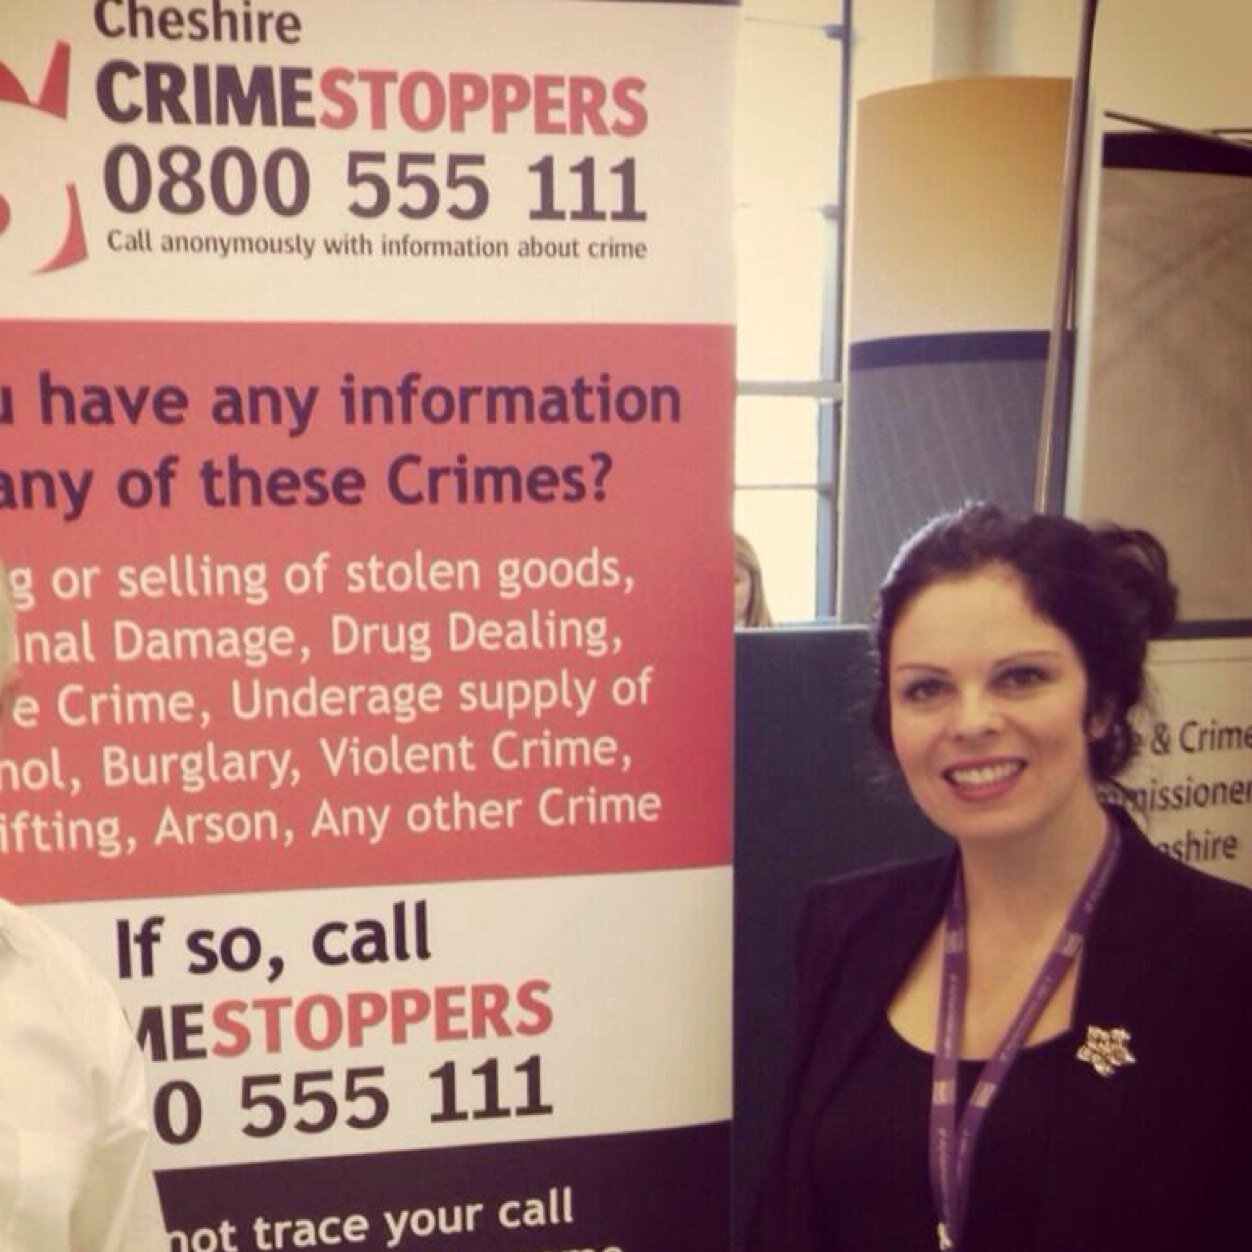 Chair of Cheshire Crimestoppers. UKs only independent Crime Fighting Charity. 
http://t.co/5Mm2lqCMl6